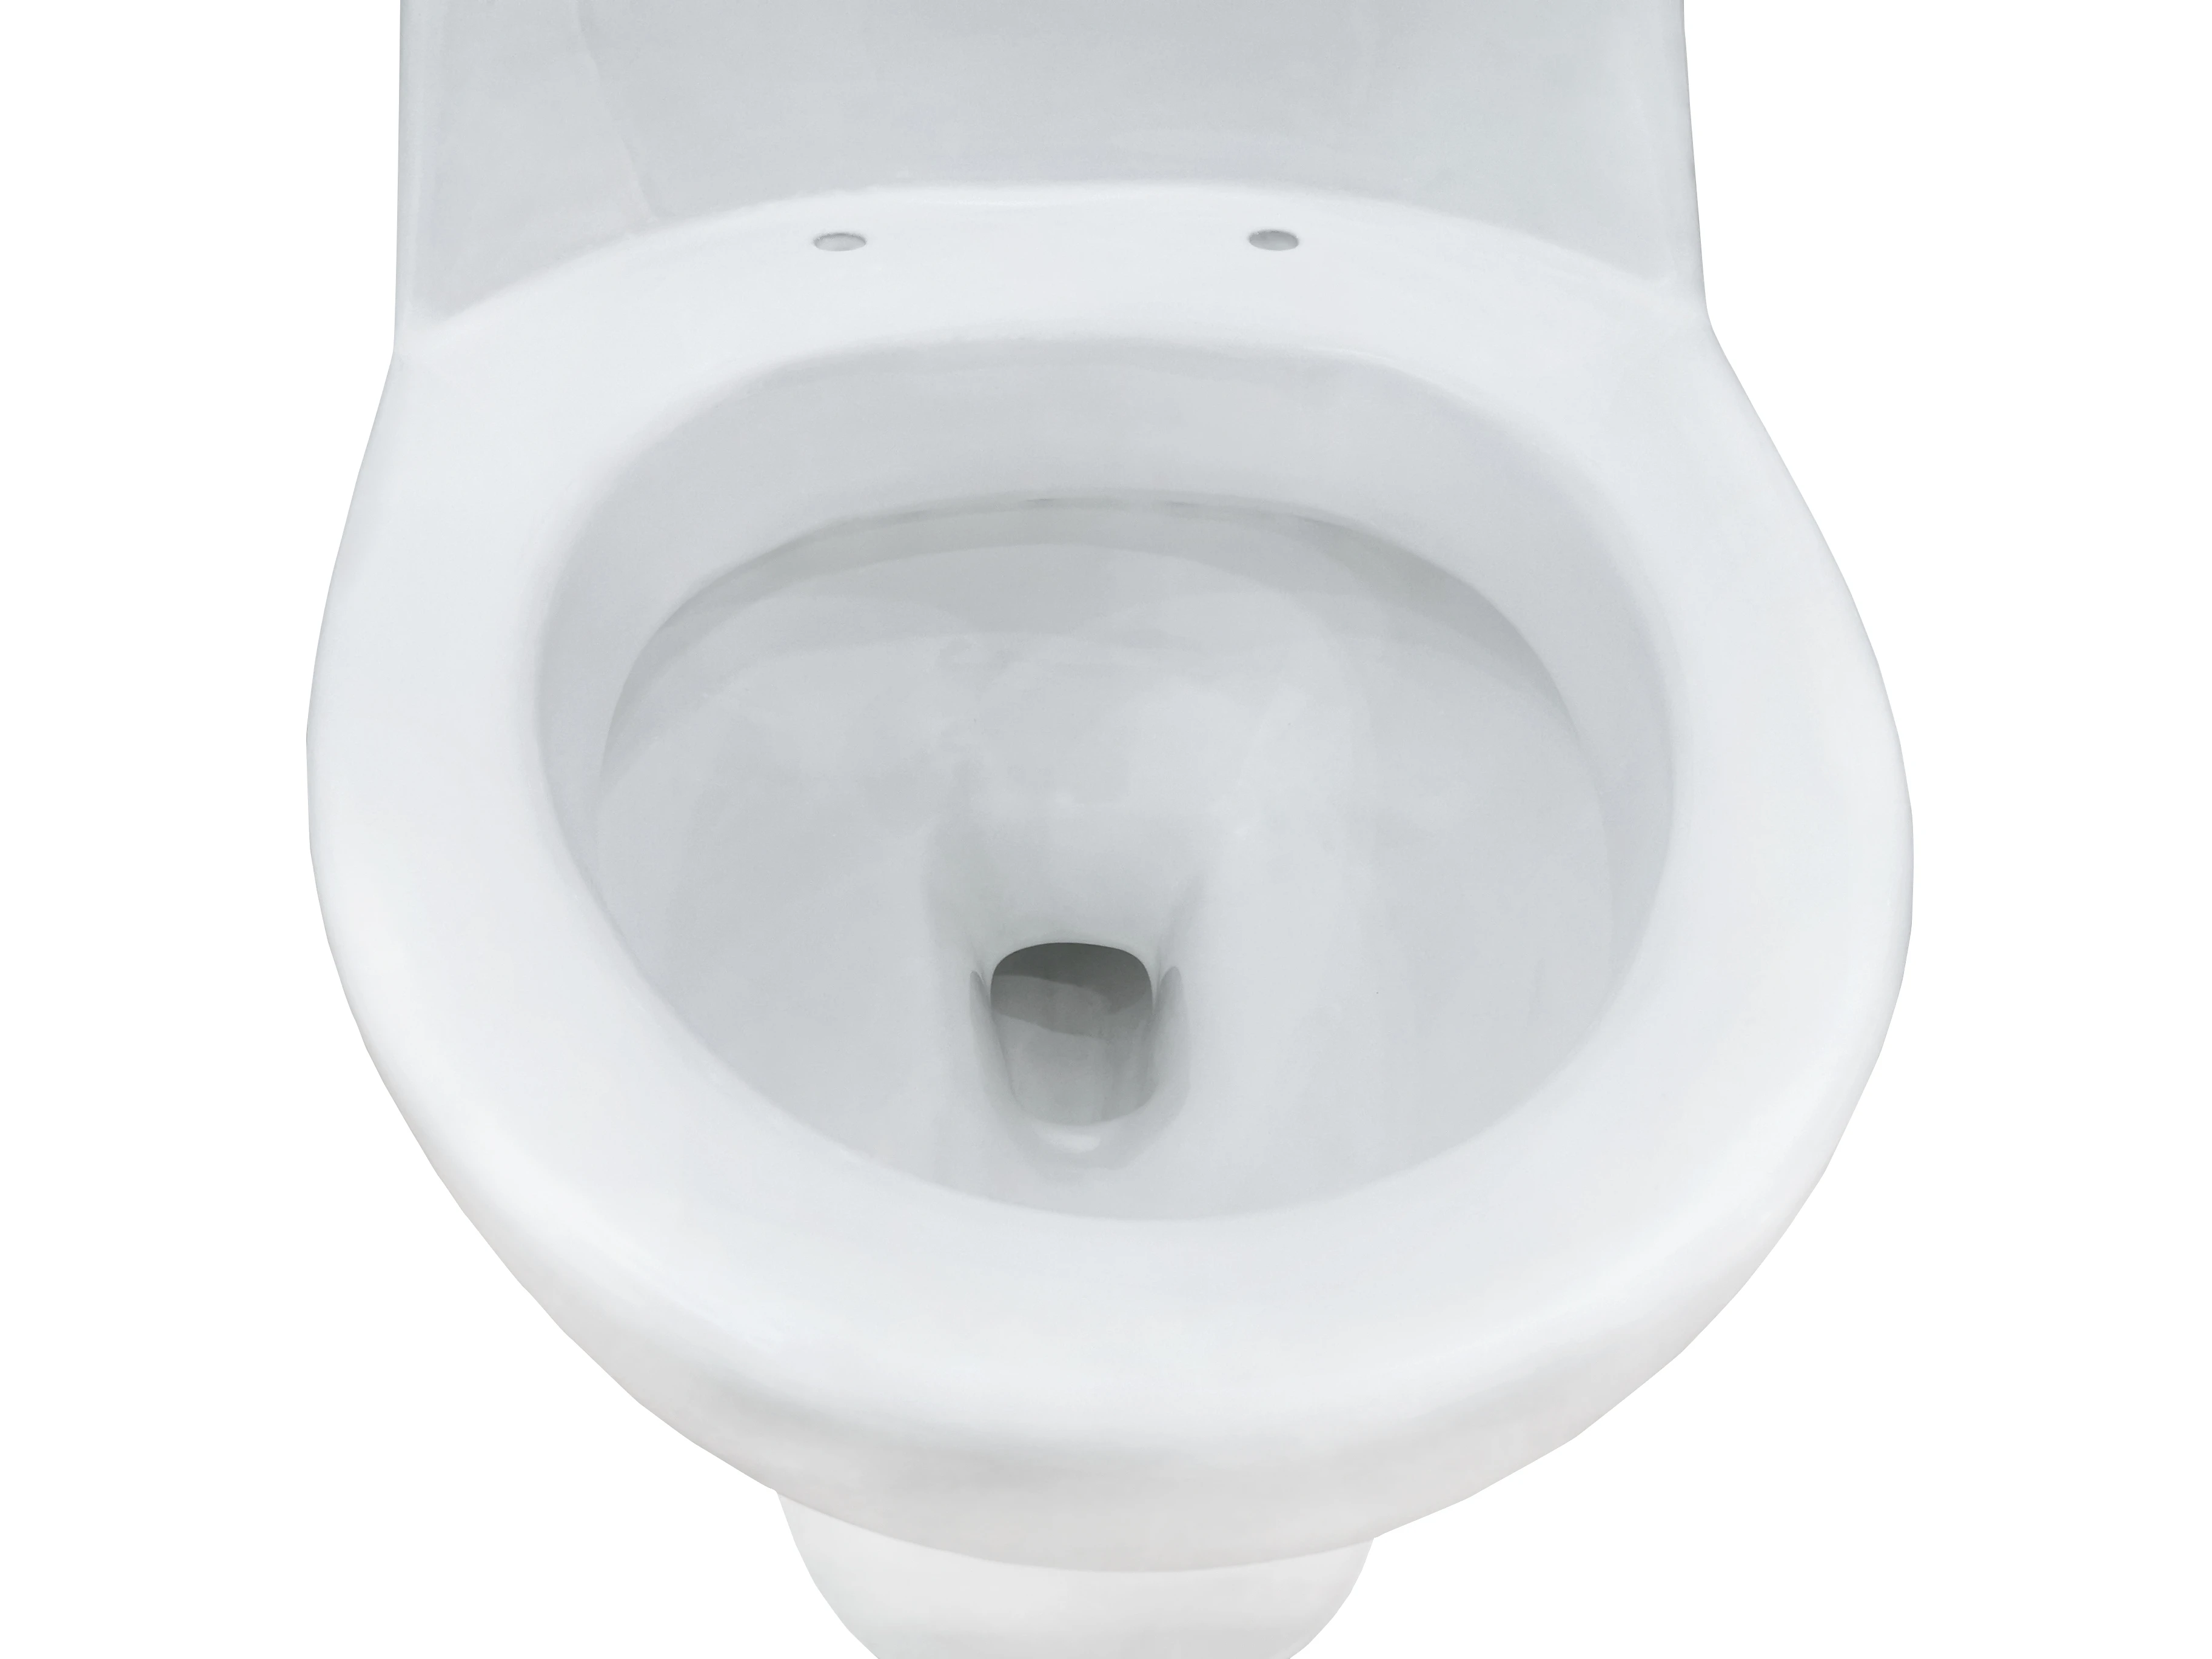 Goodone S Trap Siphonic Wc Water Closet Bathroom Toilet And Sink Set